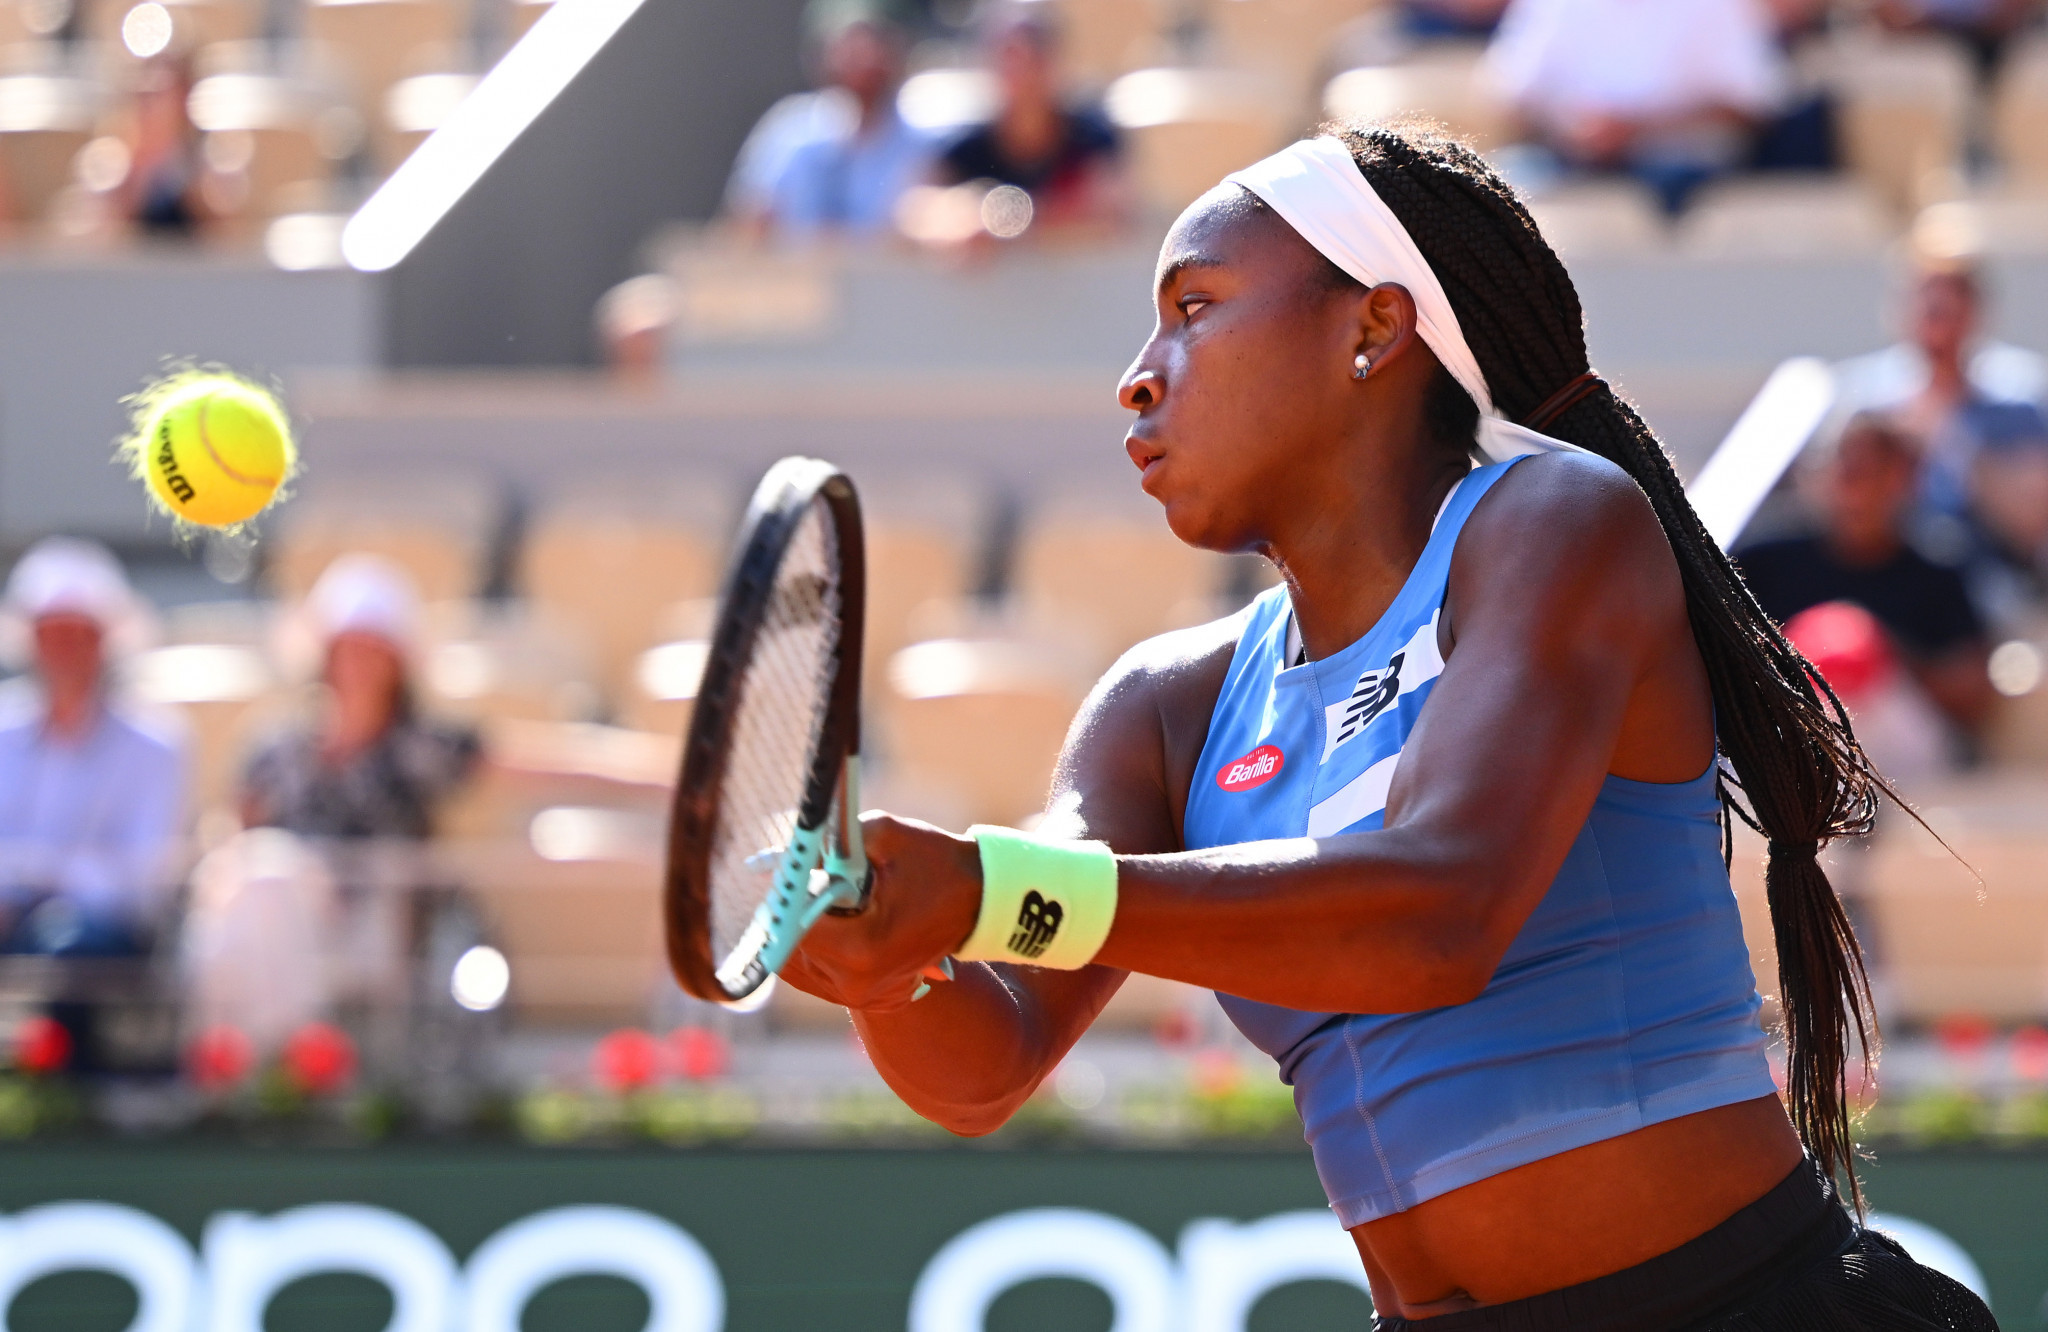 Coco Gauff will face Iga Świątek in a repeat of last year's French Open women's singles final in the last eight of this year's Roland Garros ©Getty Images